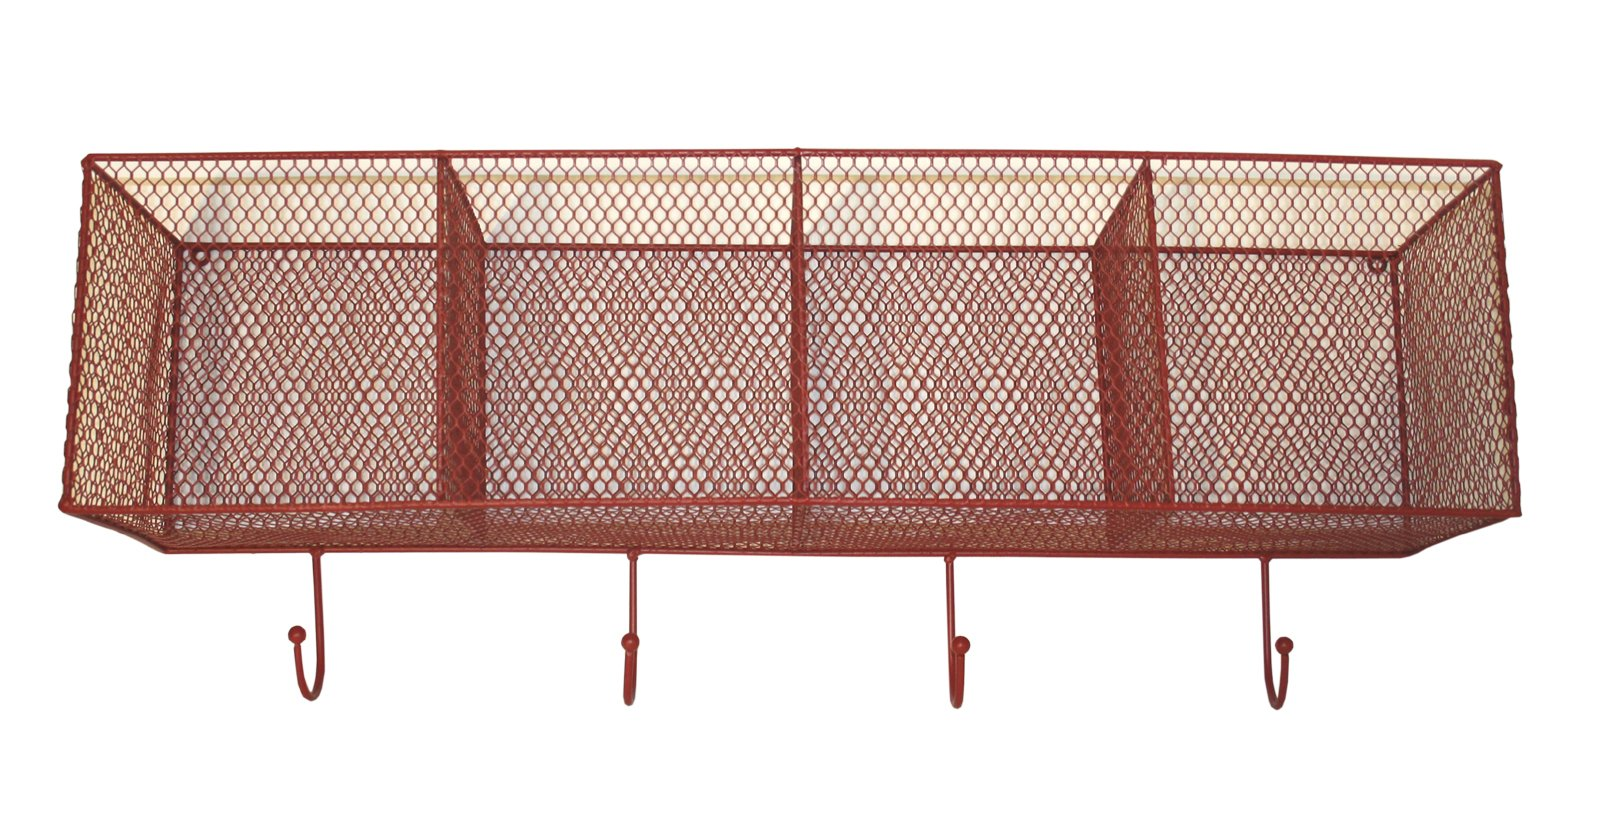 Mesher Basket And Hook Wall Shelf - Red